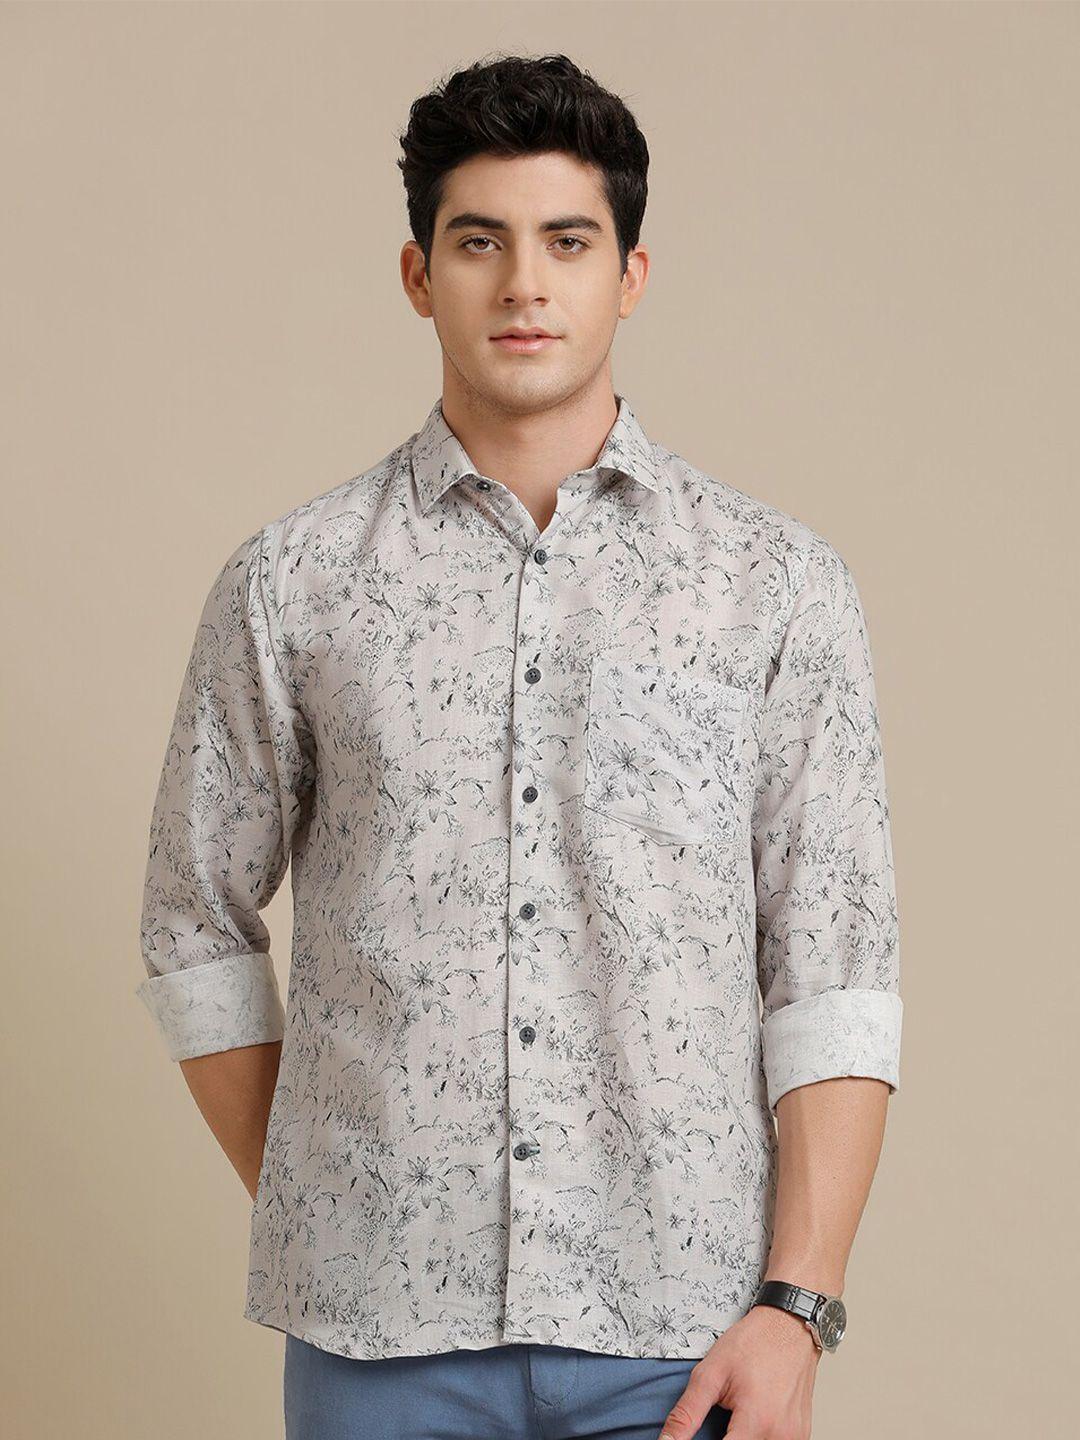 linen club contemporary floral printed pure linen casual shirt